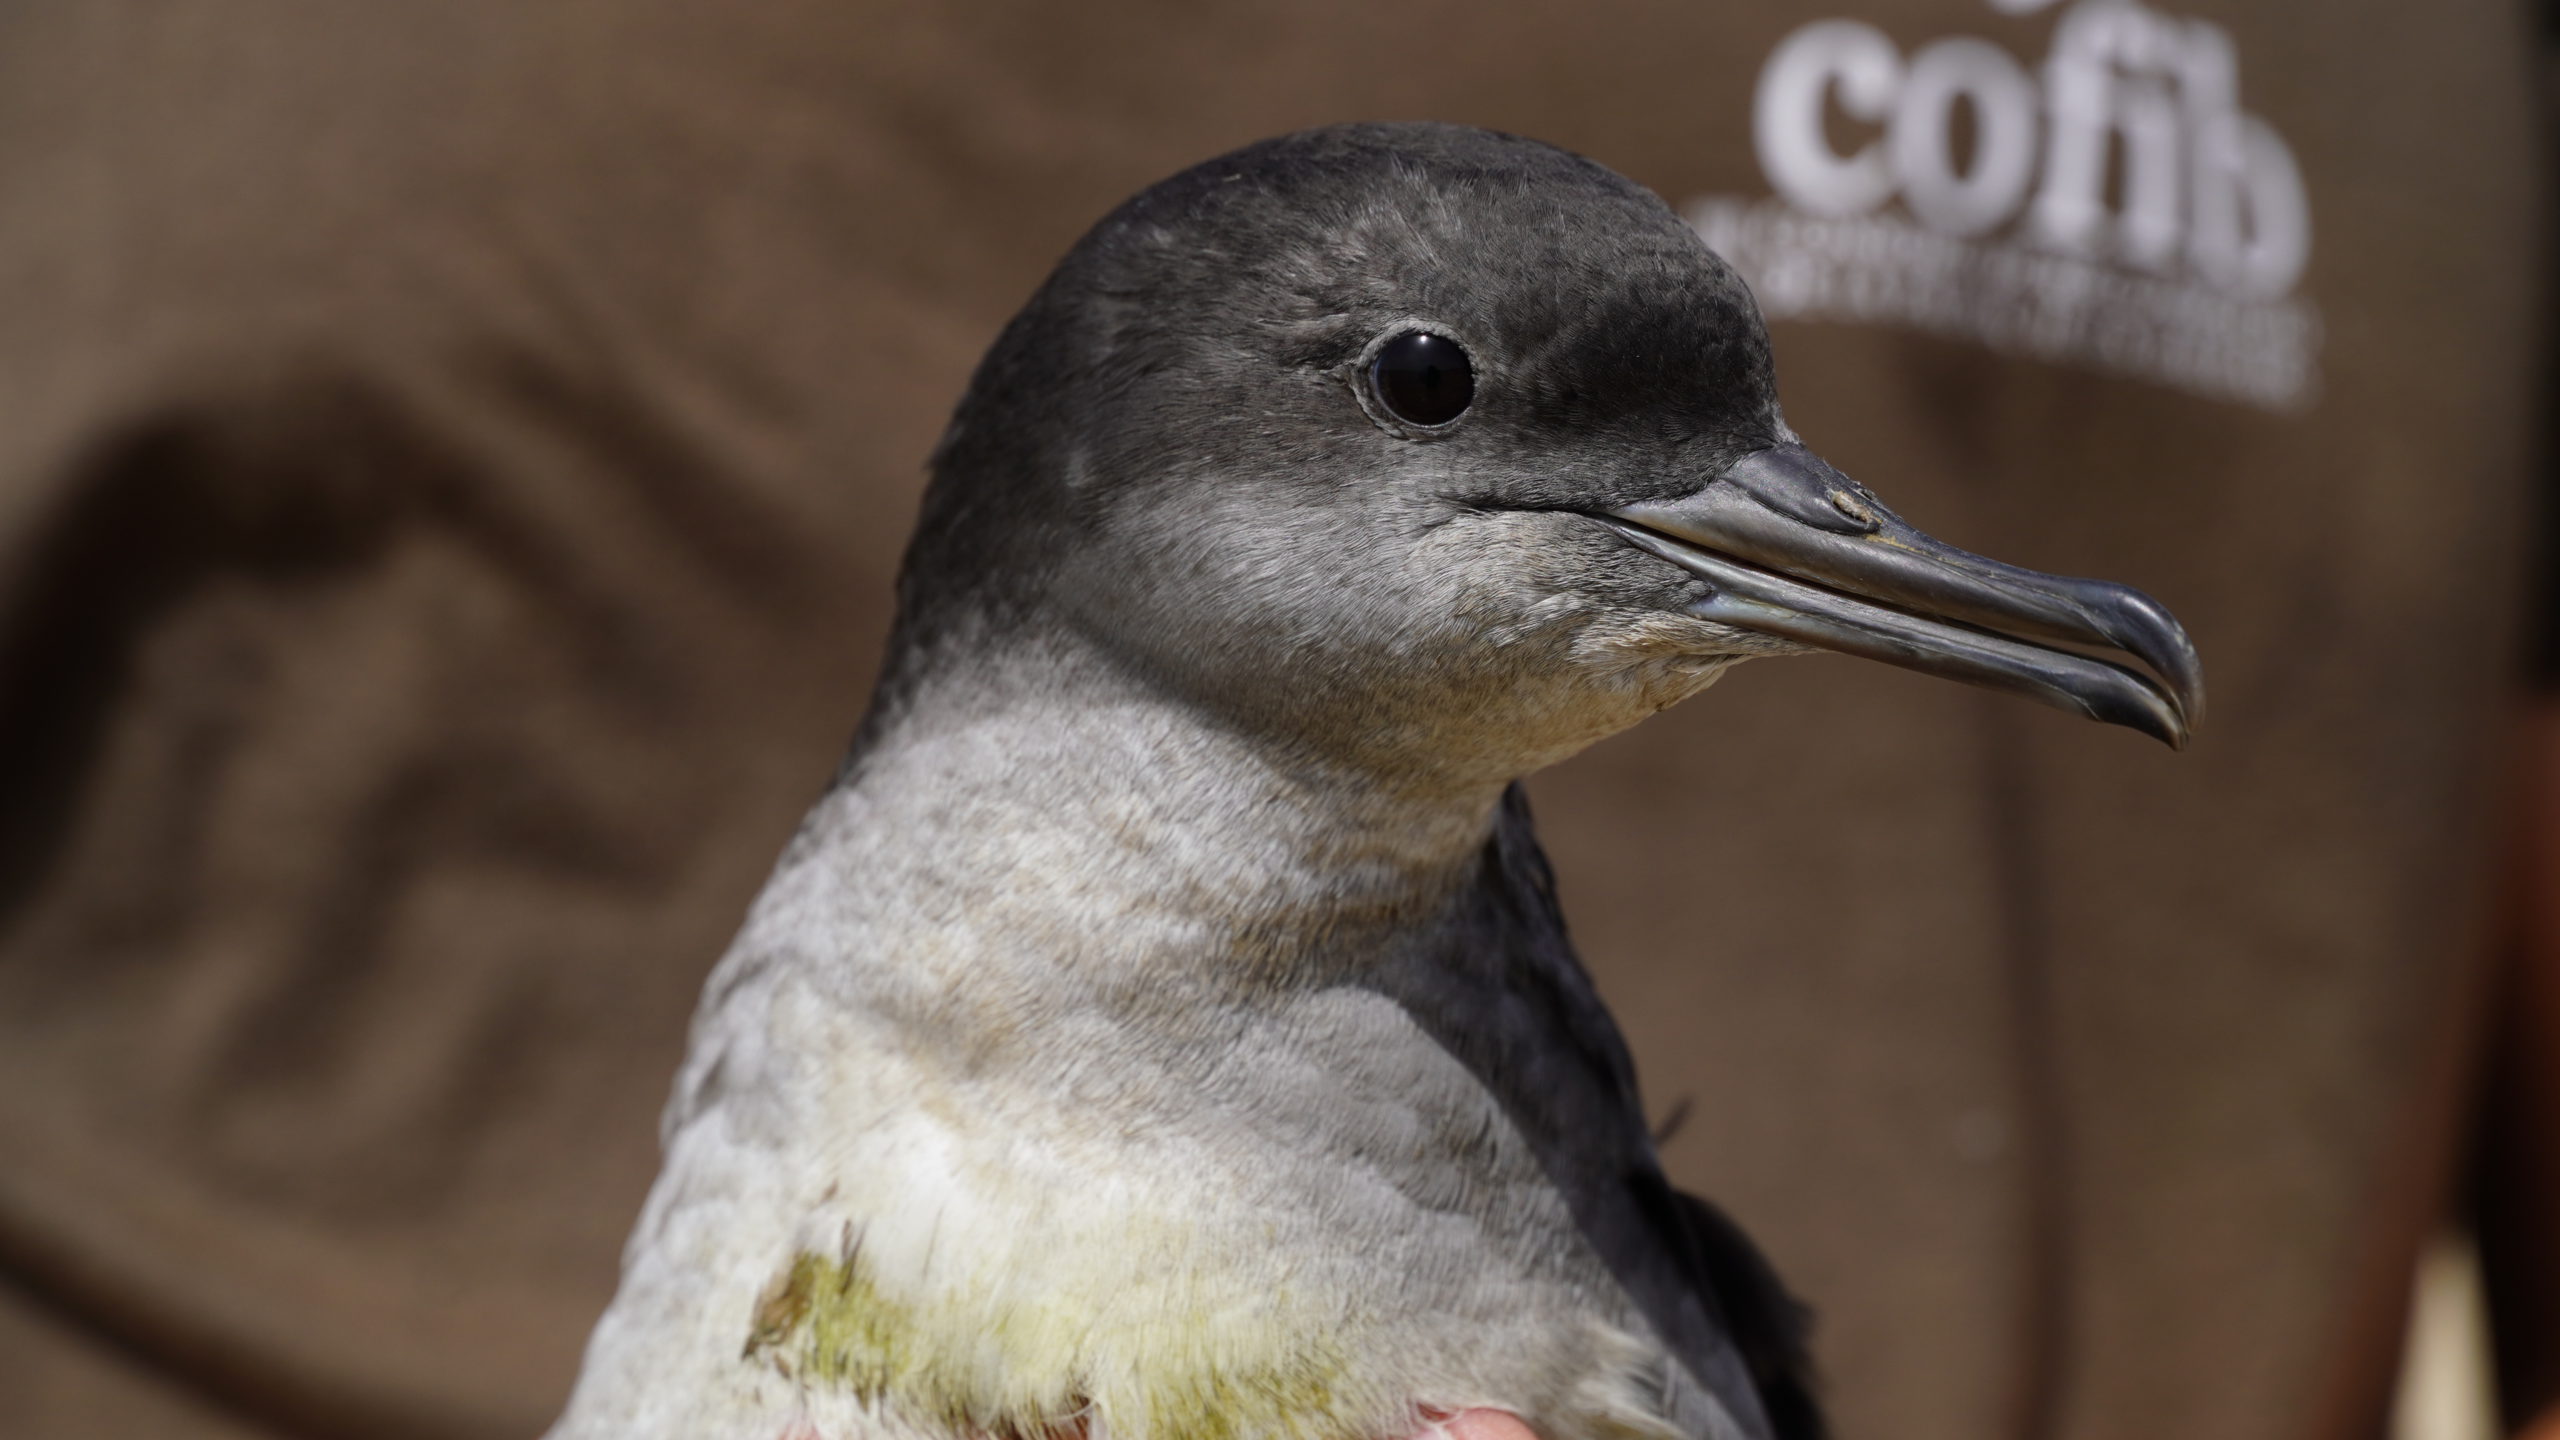 Help save the shearwaters: the Government of the Balearic Islands asks for the collaboration of citizens